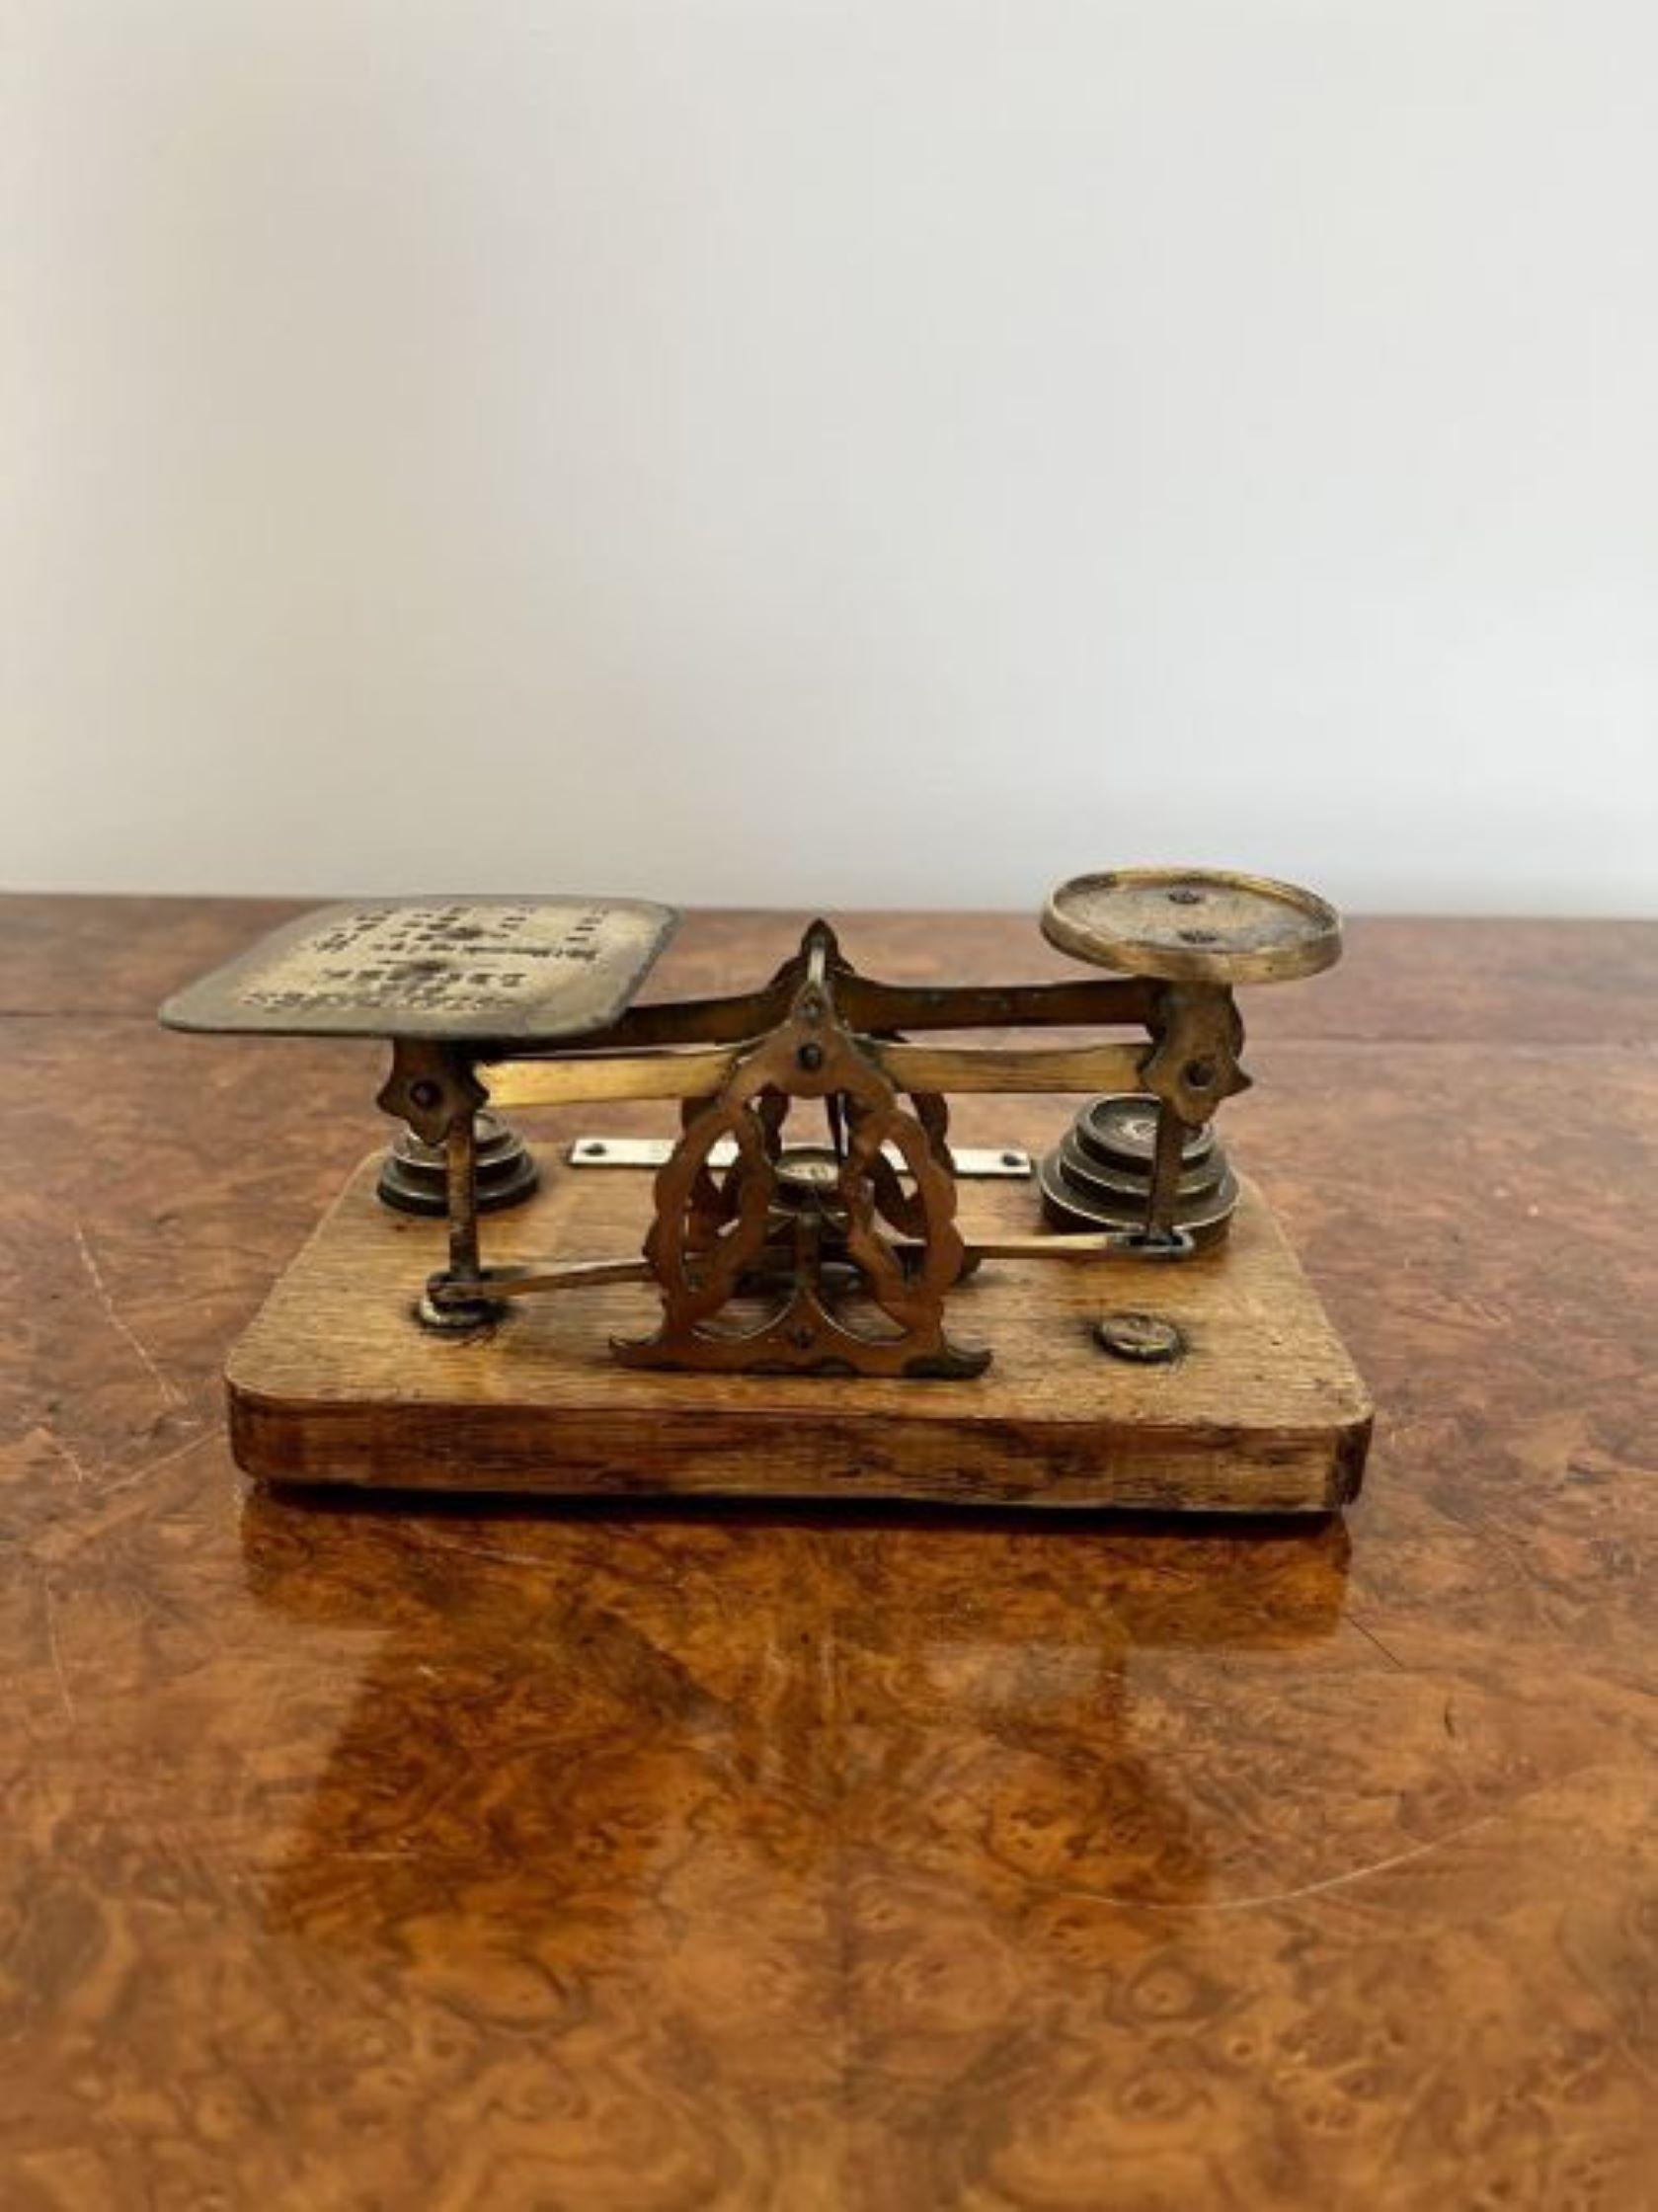 Lovely set of quality antique Victorian letter and postal scales and weights having a quality set of original antique Victorian postal scales with original brass weights 